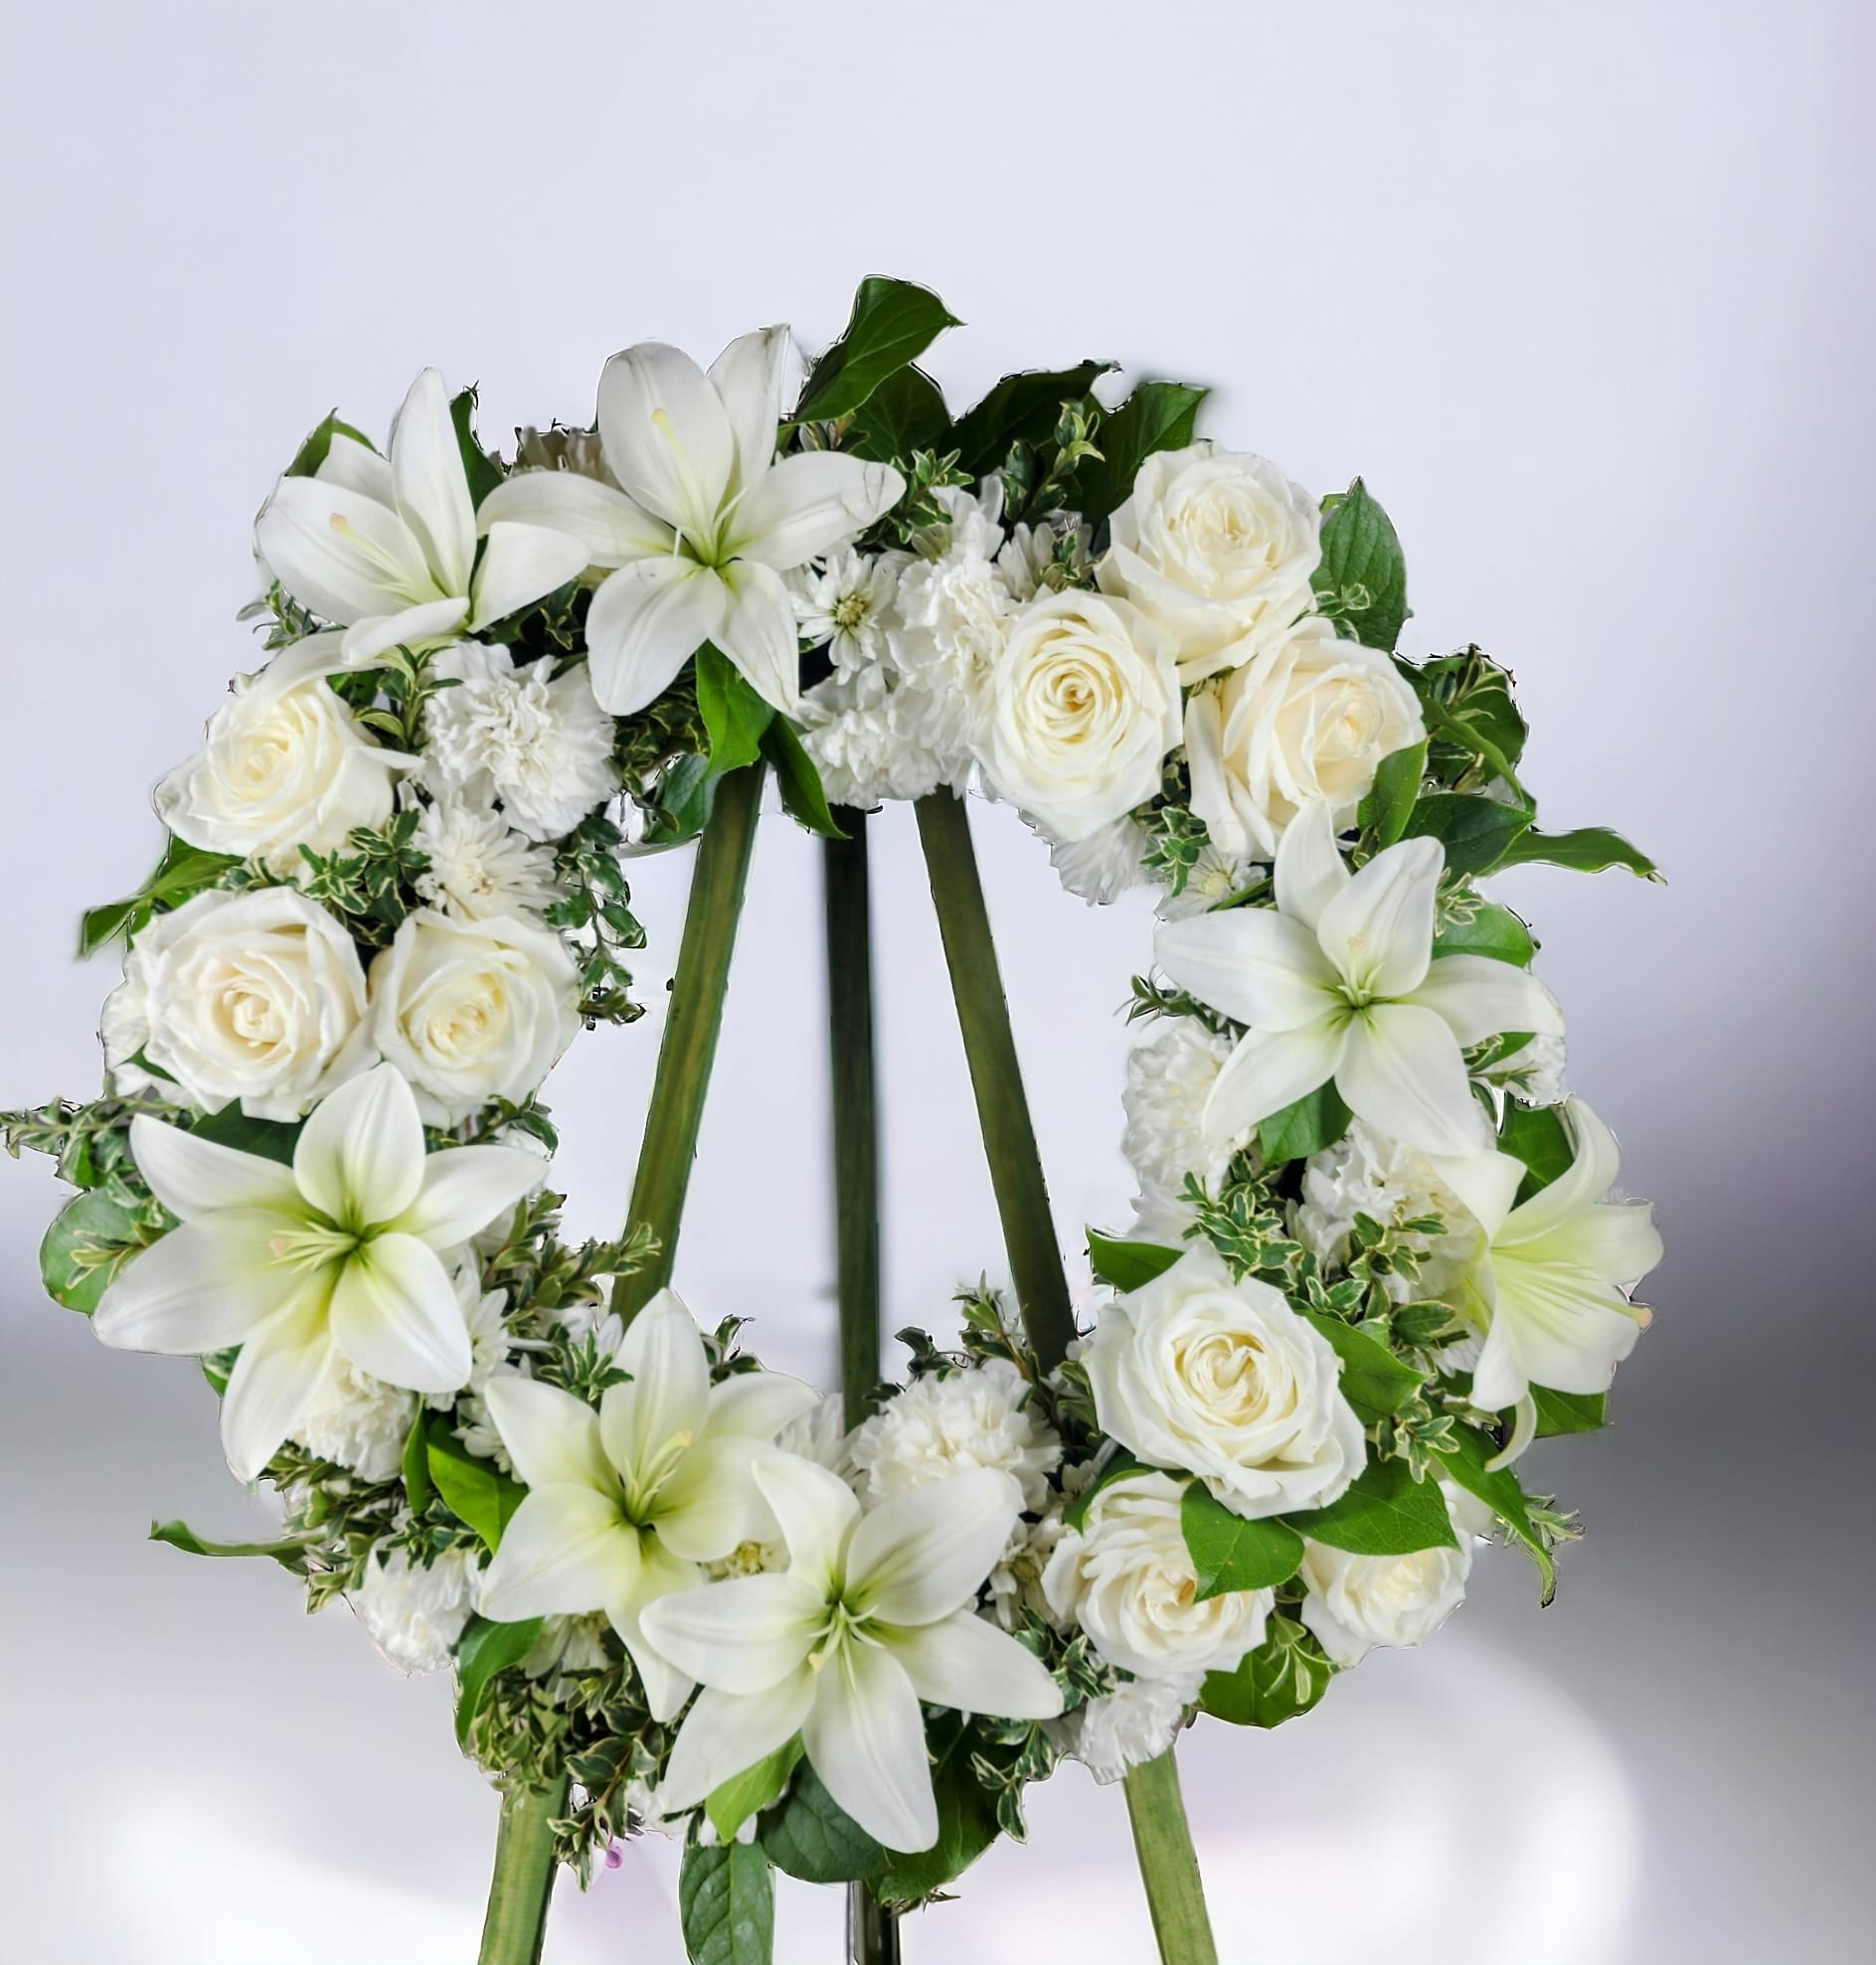 Elegant White Sympathy Wreath - This 18&quot; wreath is created using white roses, lilies, carnations and daisies on a bed of greens. A wire tripod stand is included.